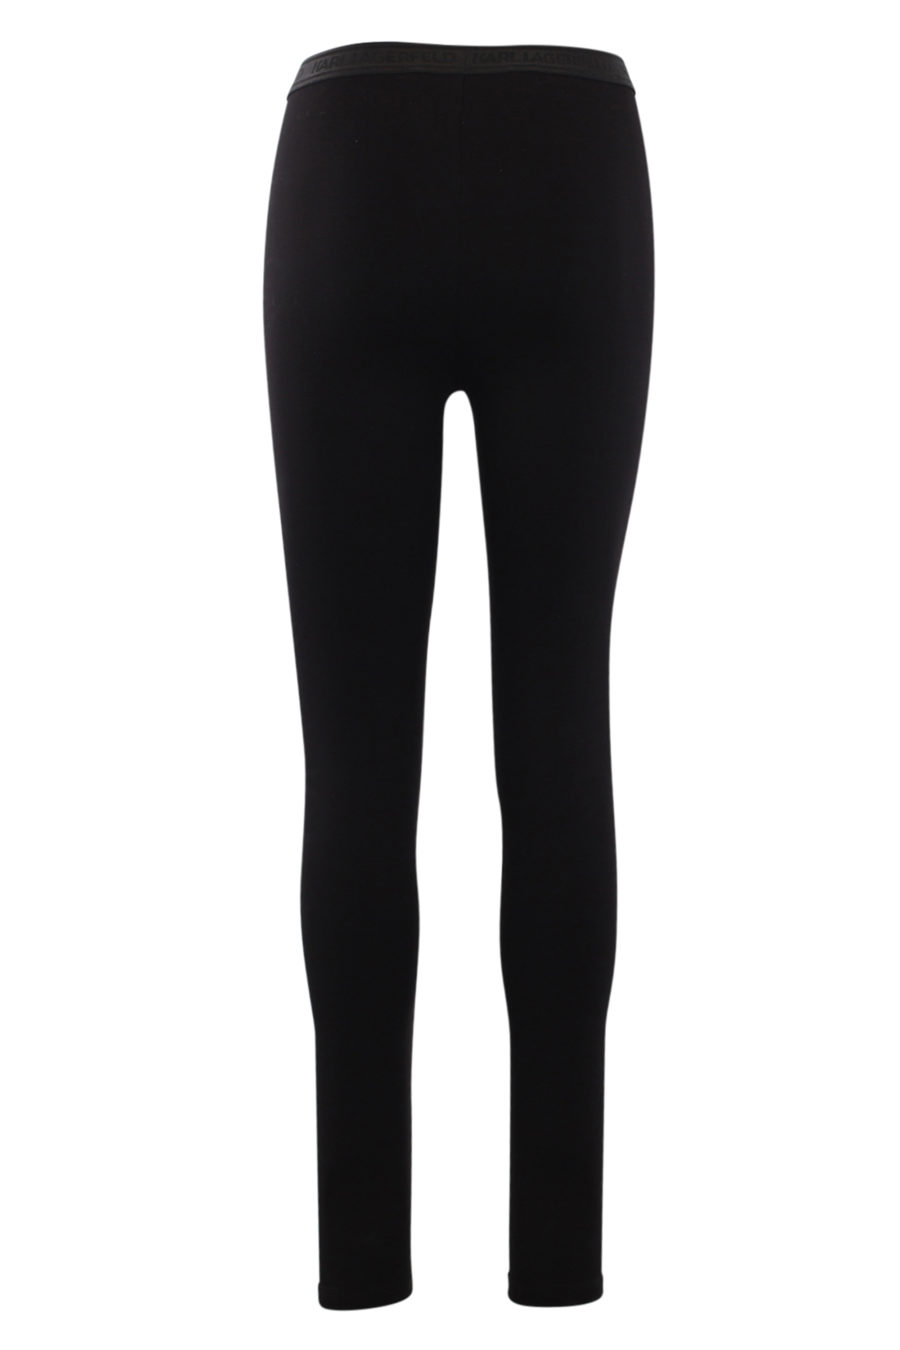 Black leggings with embroidered logo on the side - IMG 0505